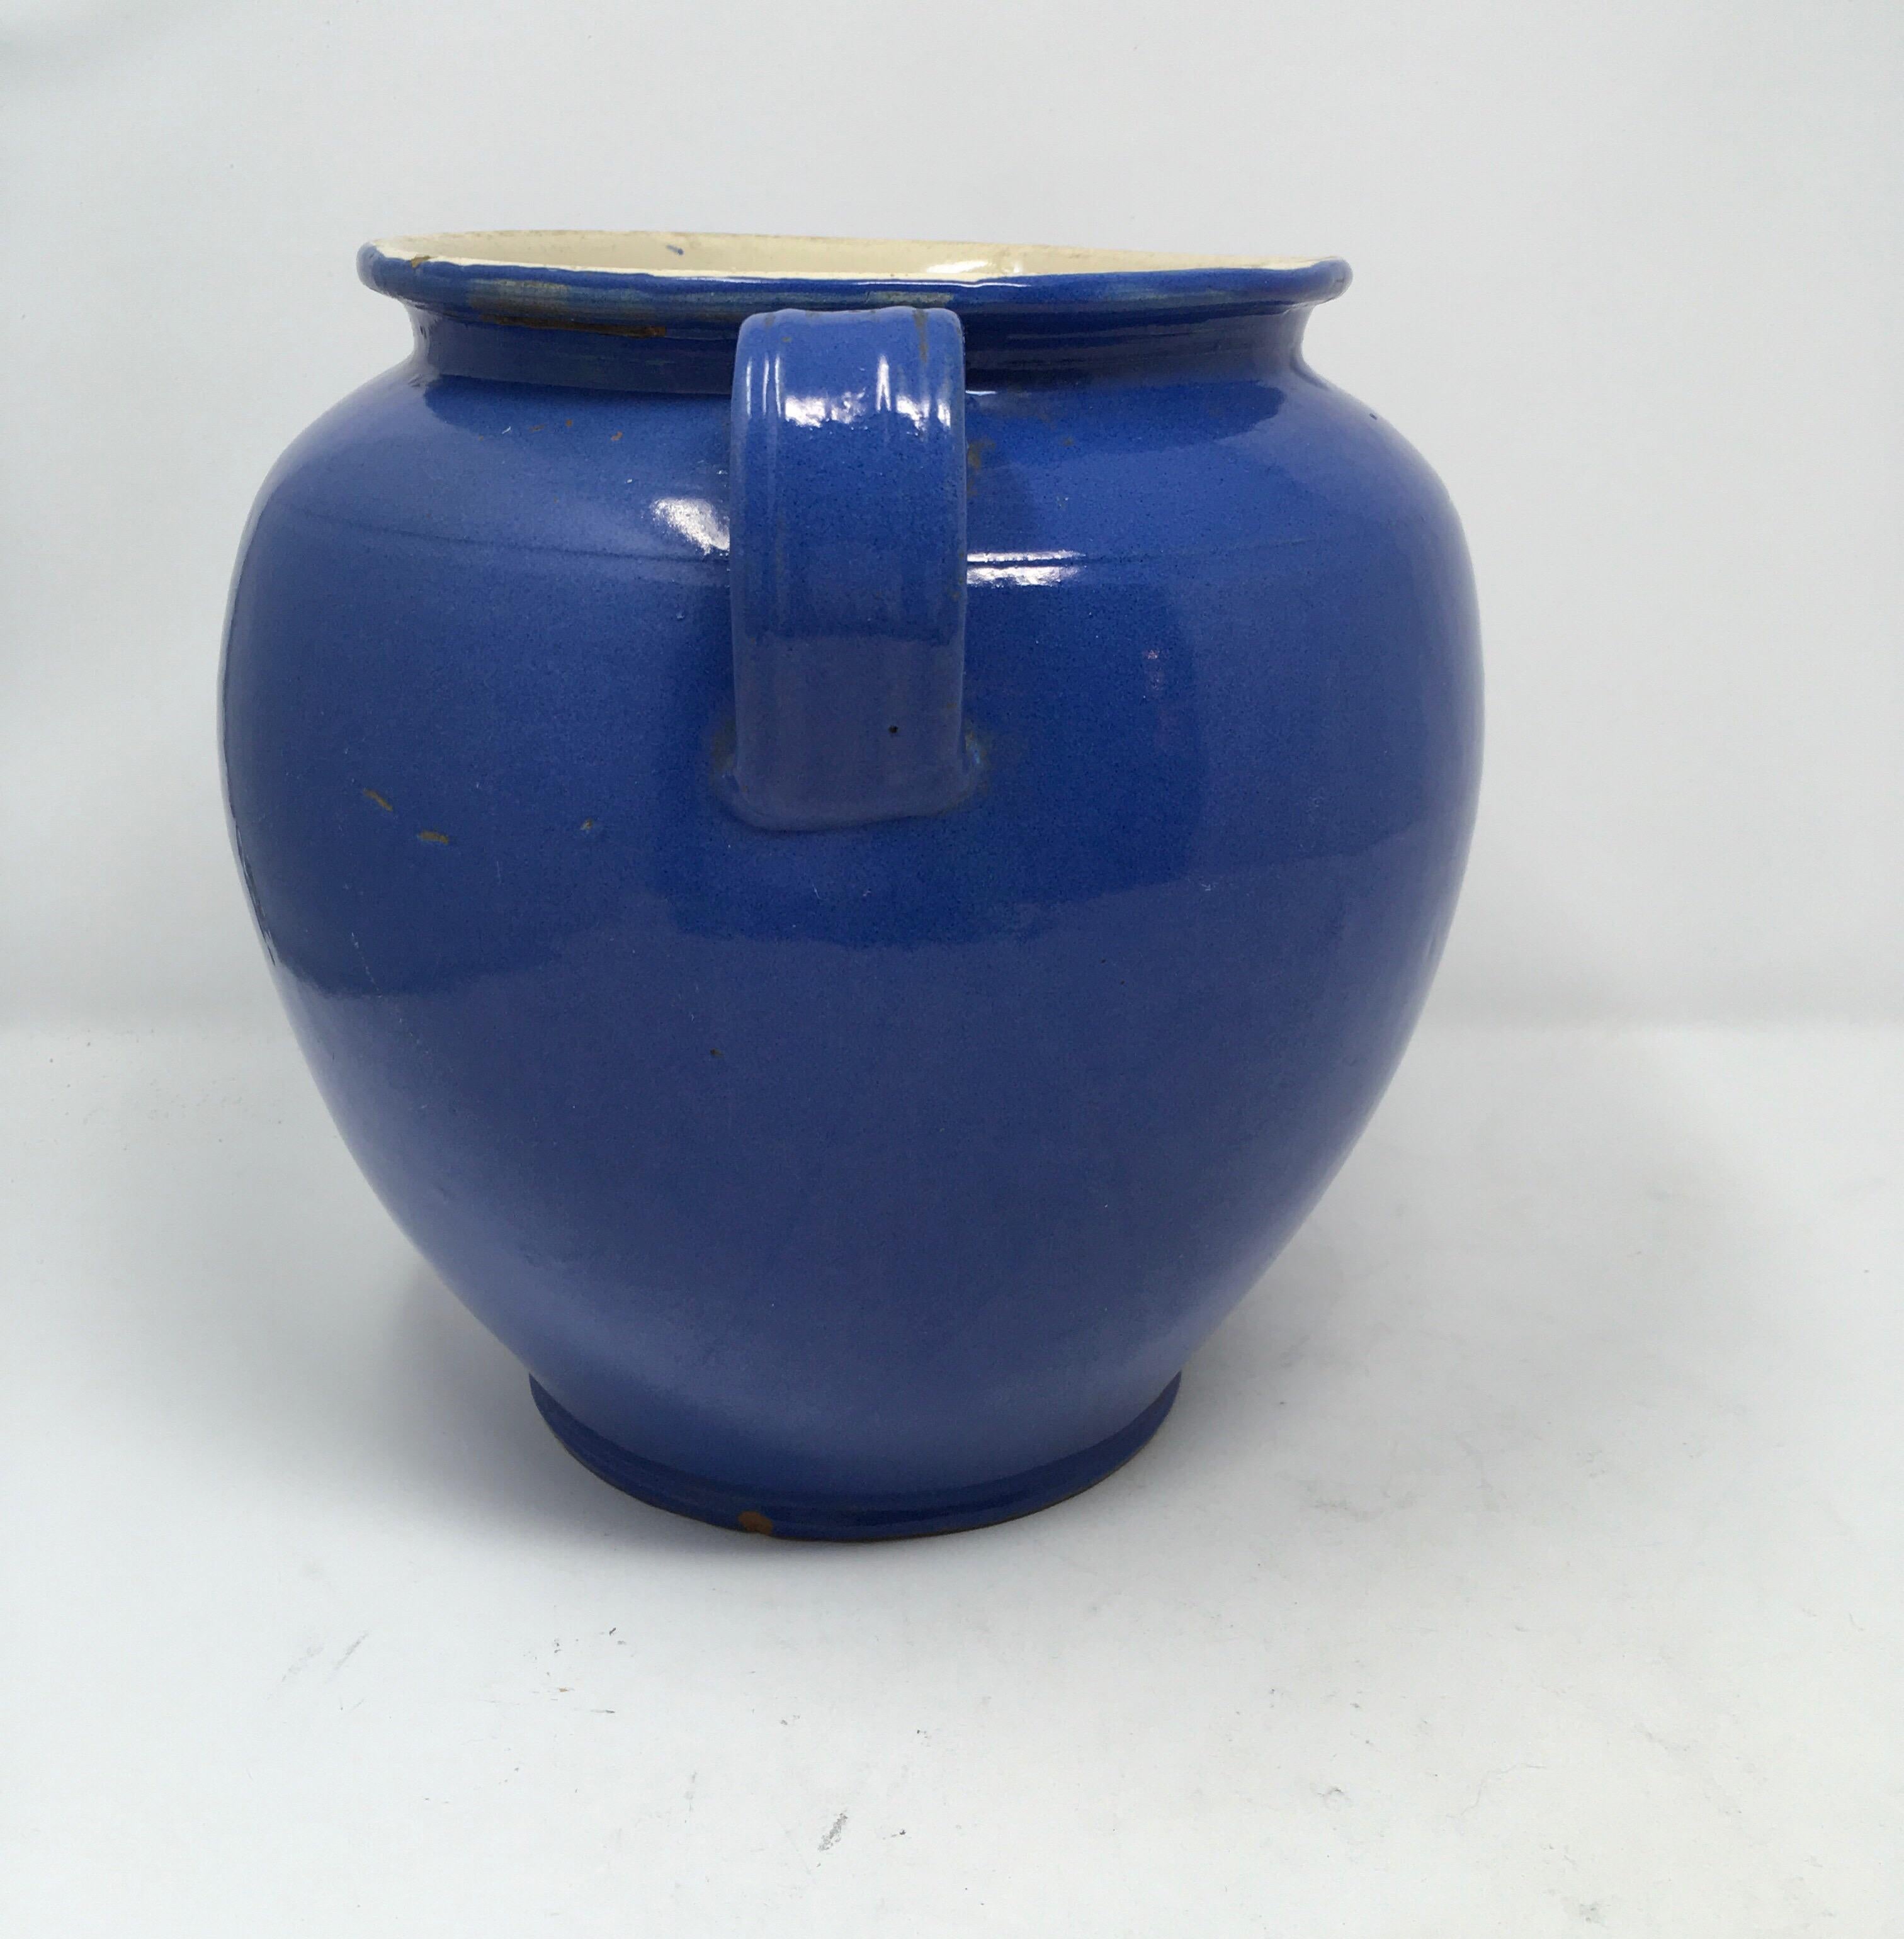 Found in the South of France, this antique French blue confit Pot is from the 19th century. Covered in a blue glaze, pots like this were a staple in every French kitchen for preserving. From the South West of France, it has two small handles on each